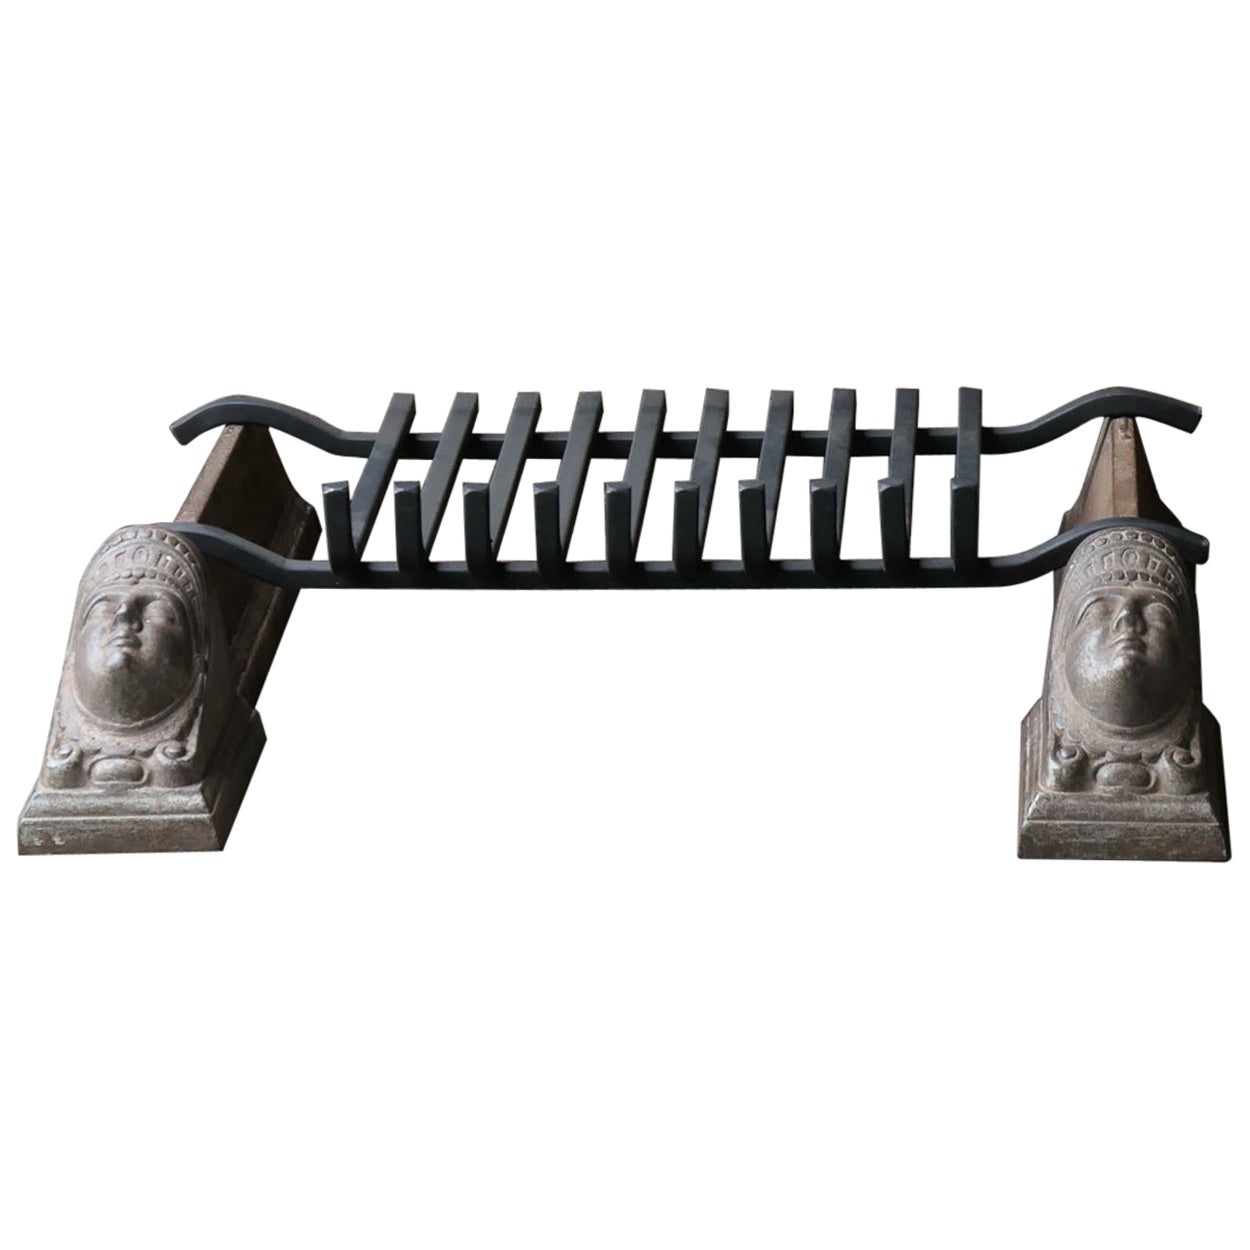 18th-19th Century French Fire Grate, Fireplace Grate